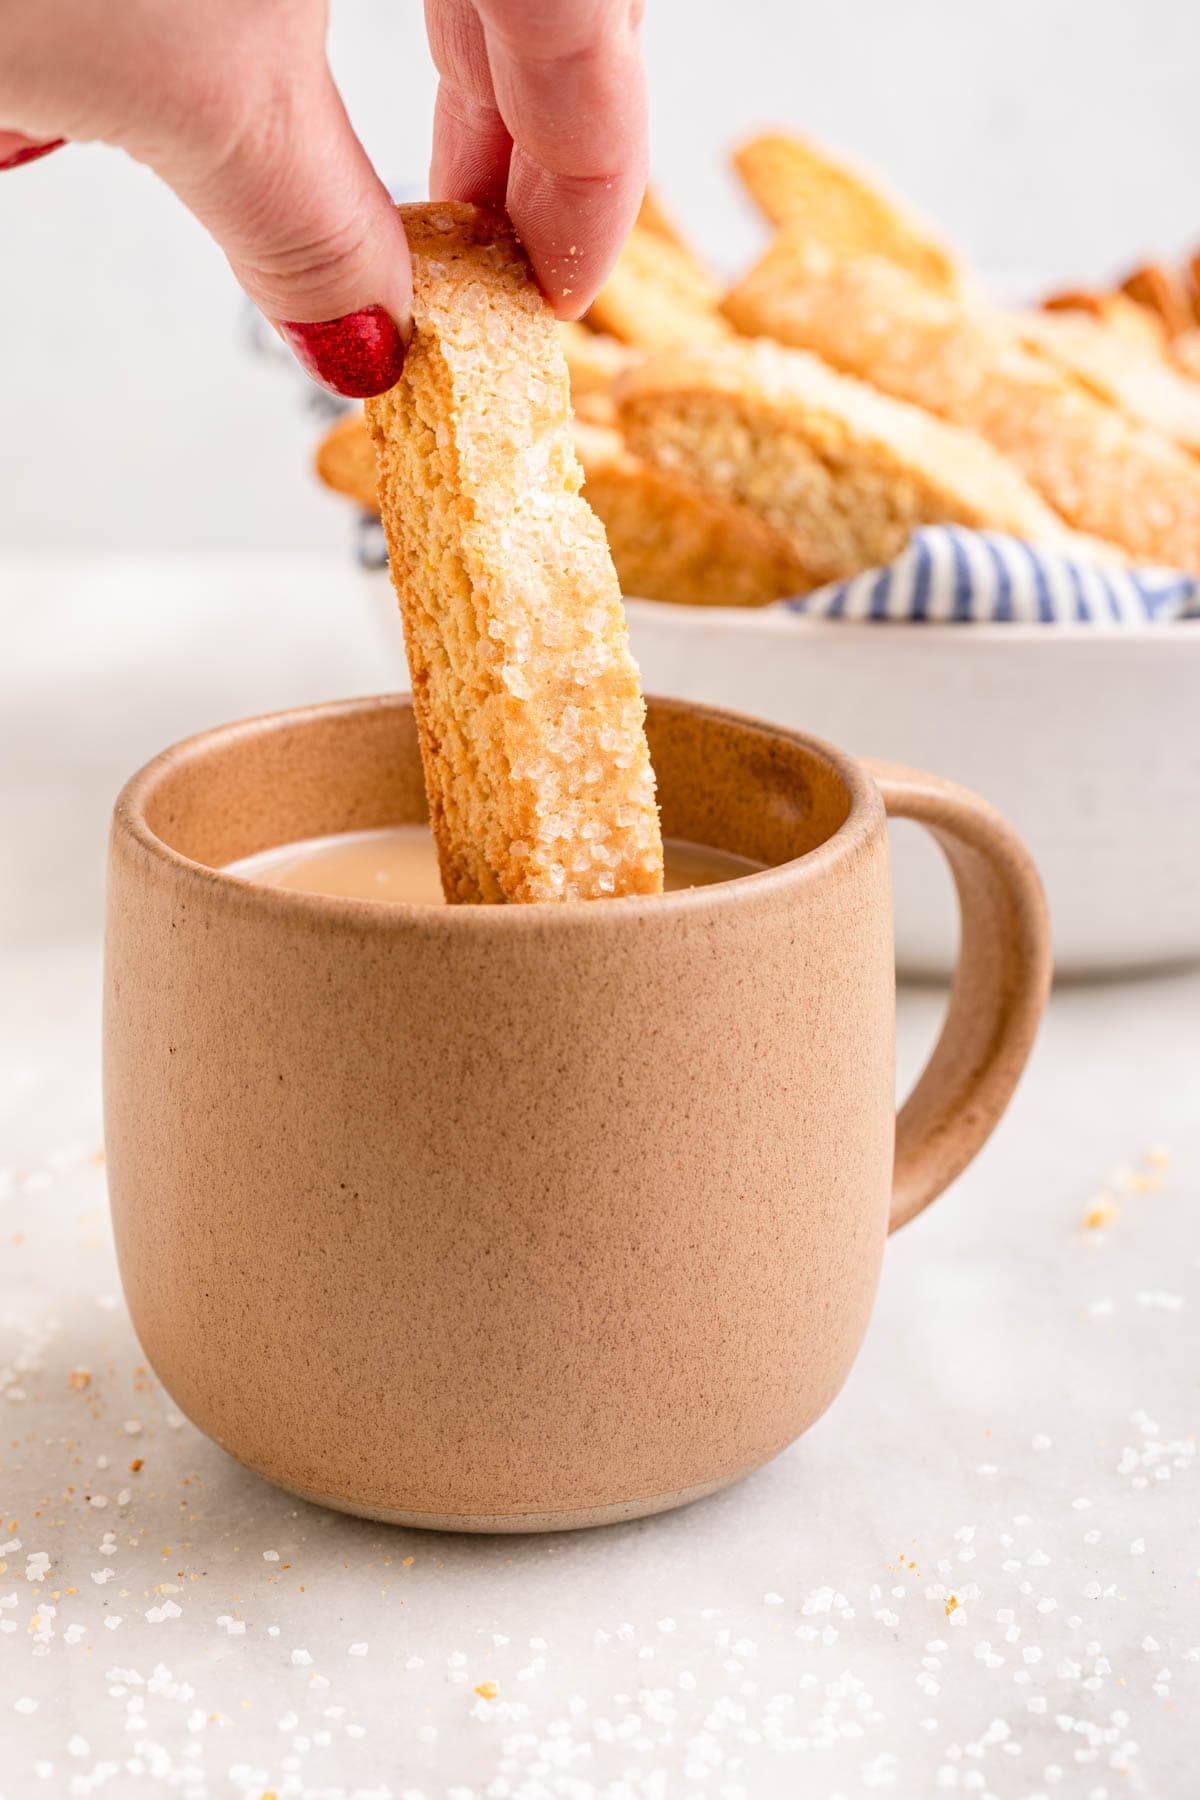 Classic Biscotti Cookies dipping in coffee 